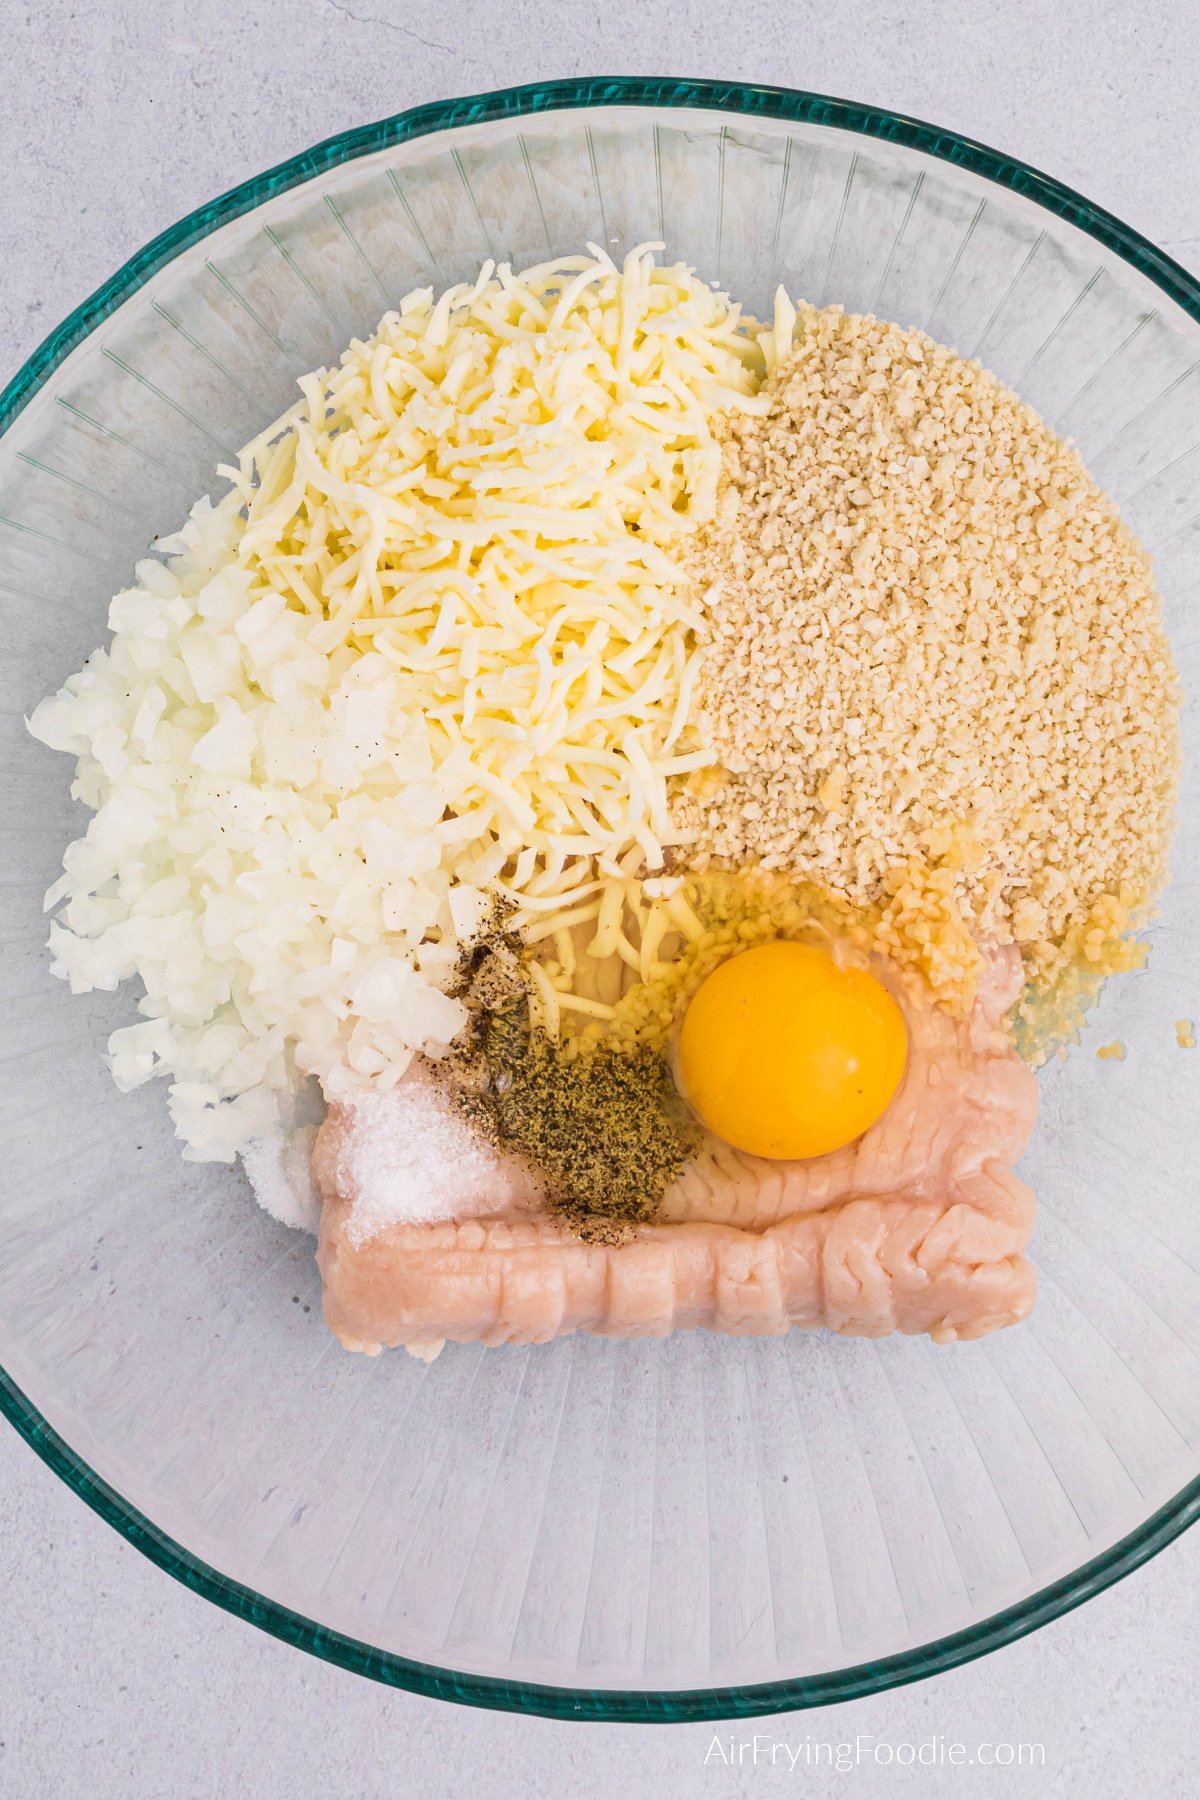 chicken meat, egg, and other ingredients needed to make chicken burger patties